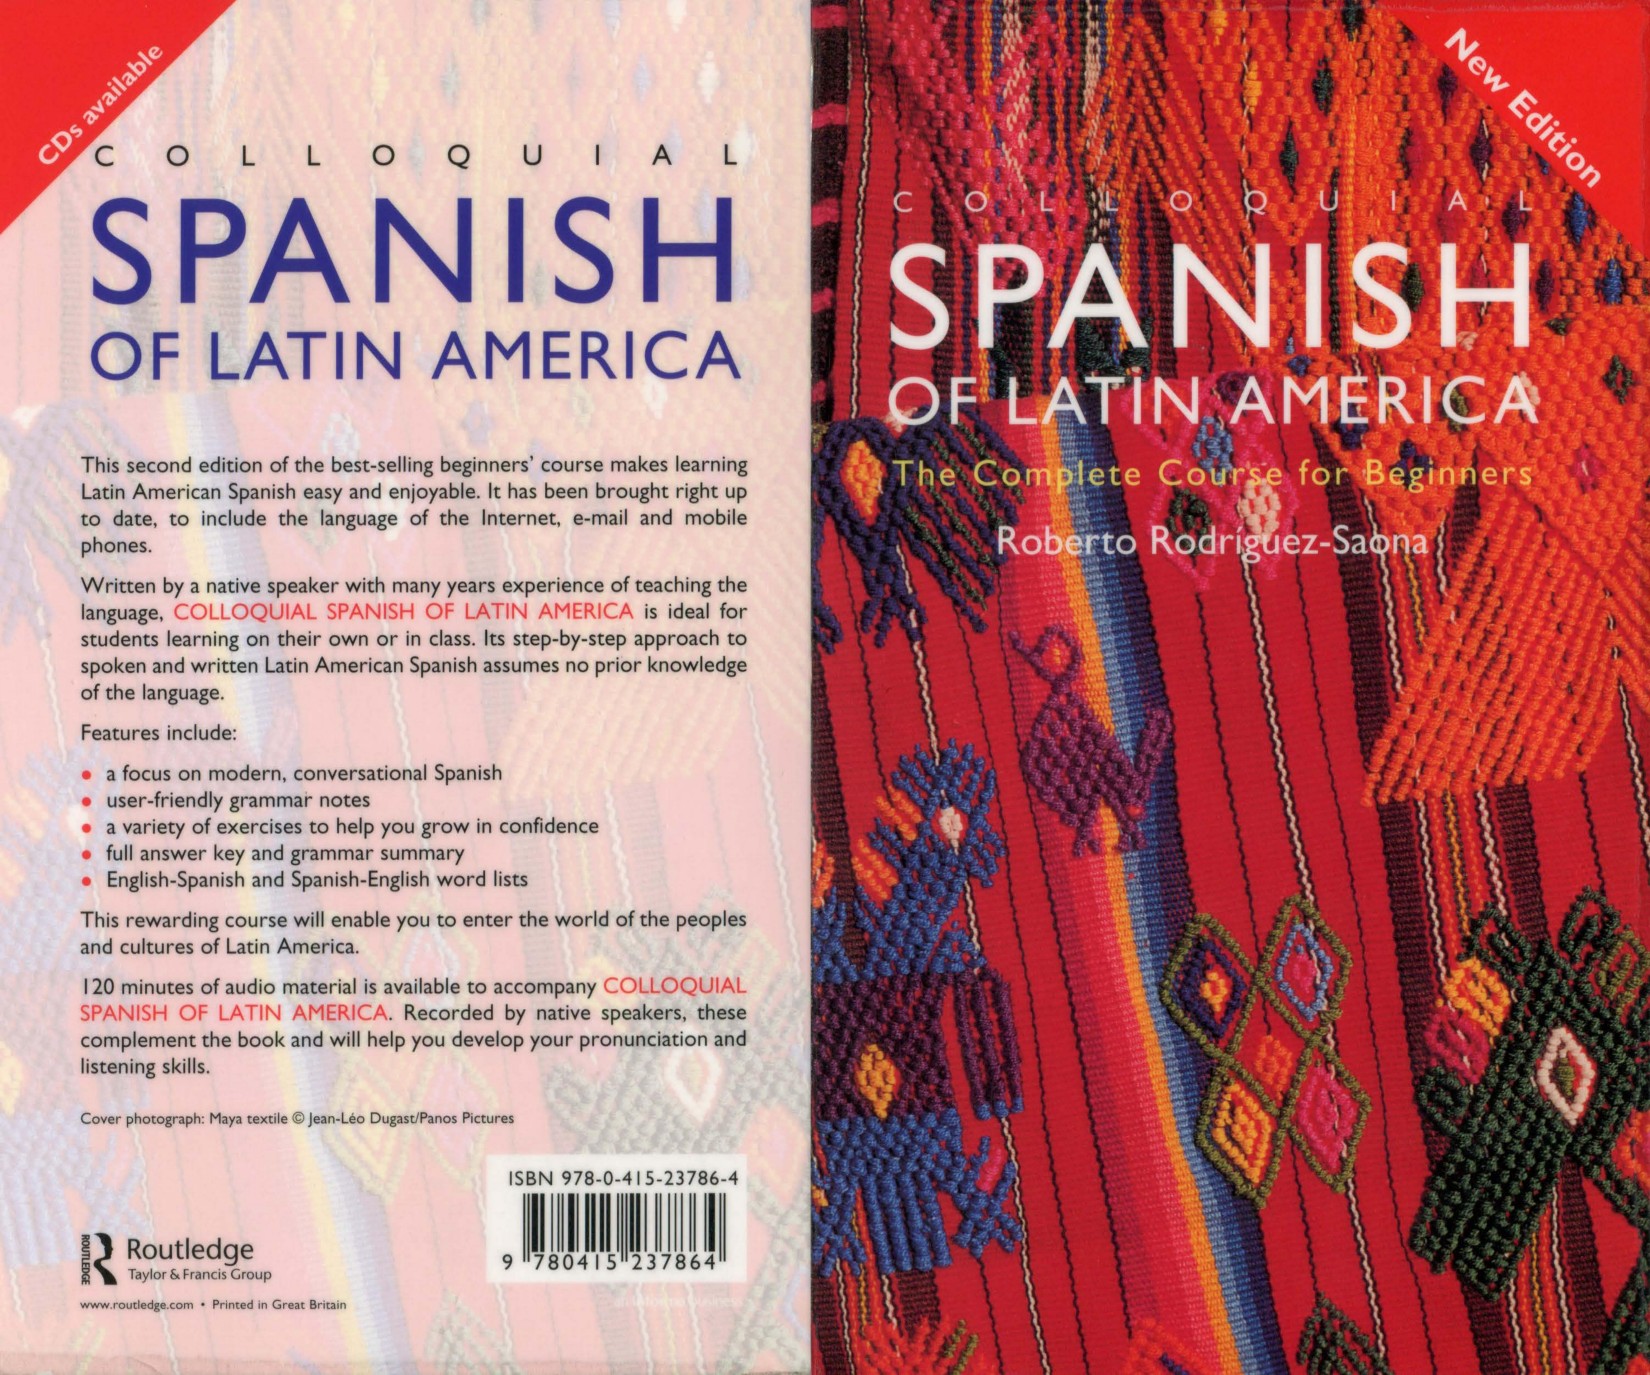 Colloquial Spanish Of Latin America The Complete Course For Beginners